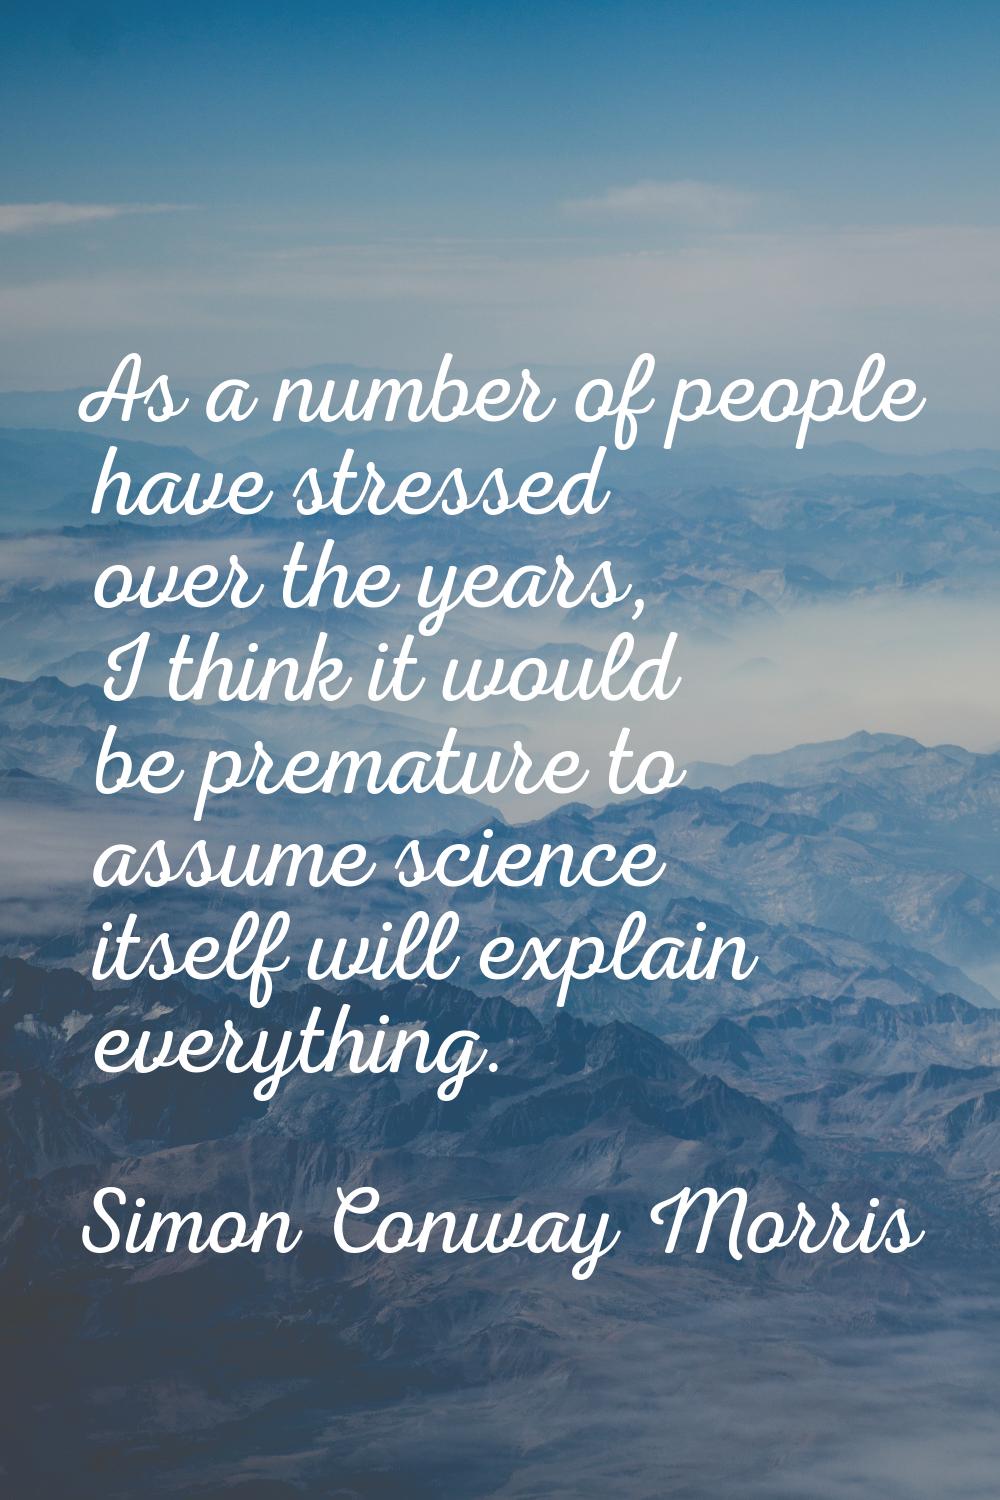 As a number of people have stressed over the years, I think it would be premature to assume science